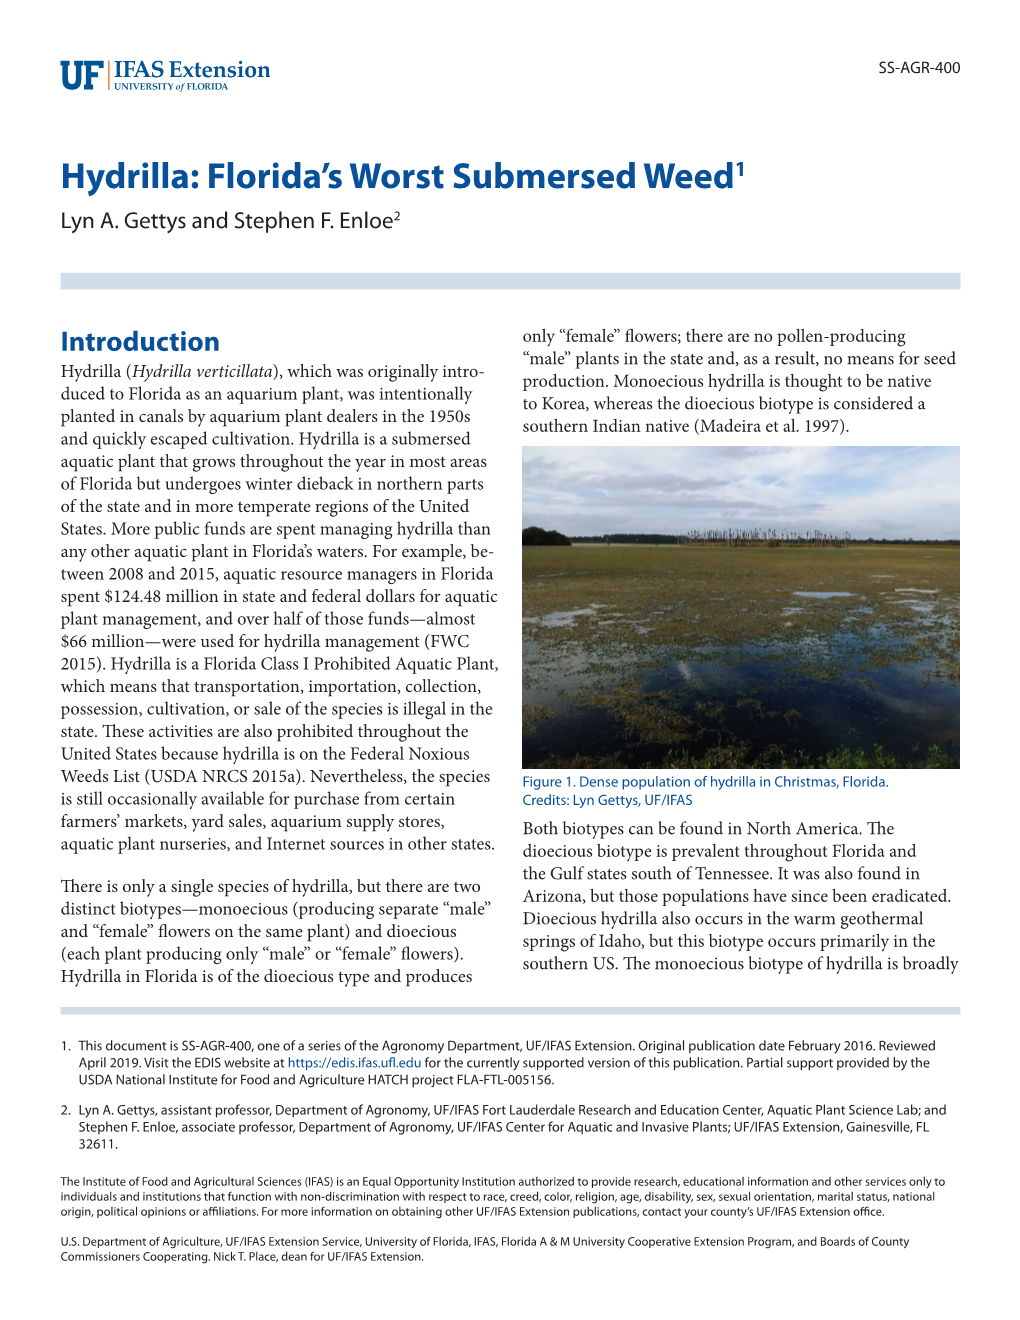 Hydrilla: Florida's Worst Submersed Weed1